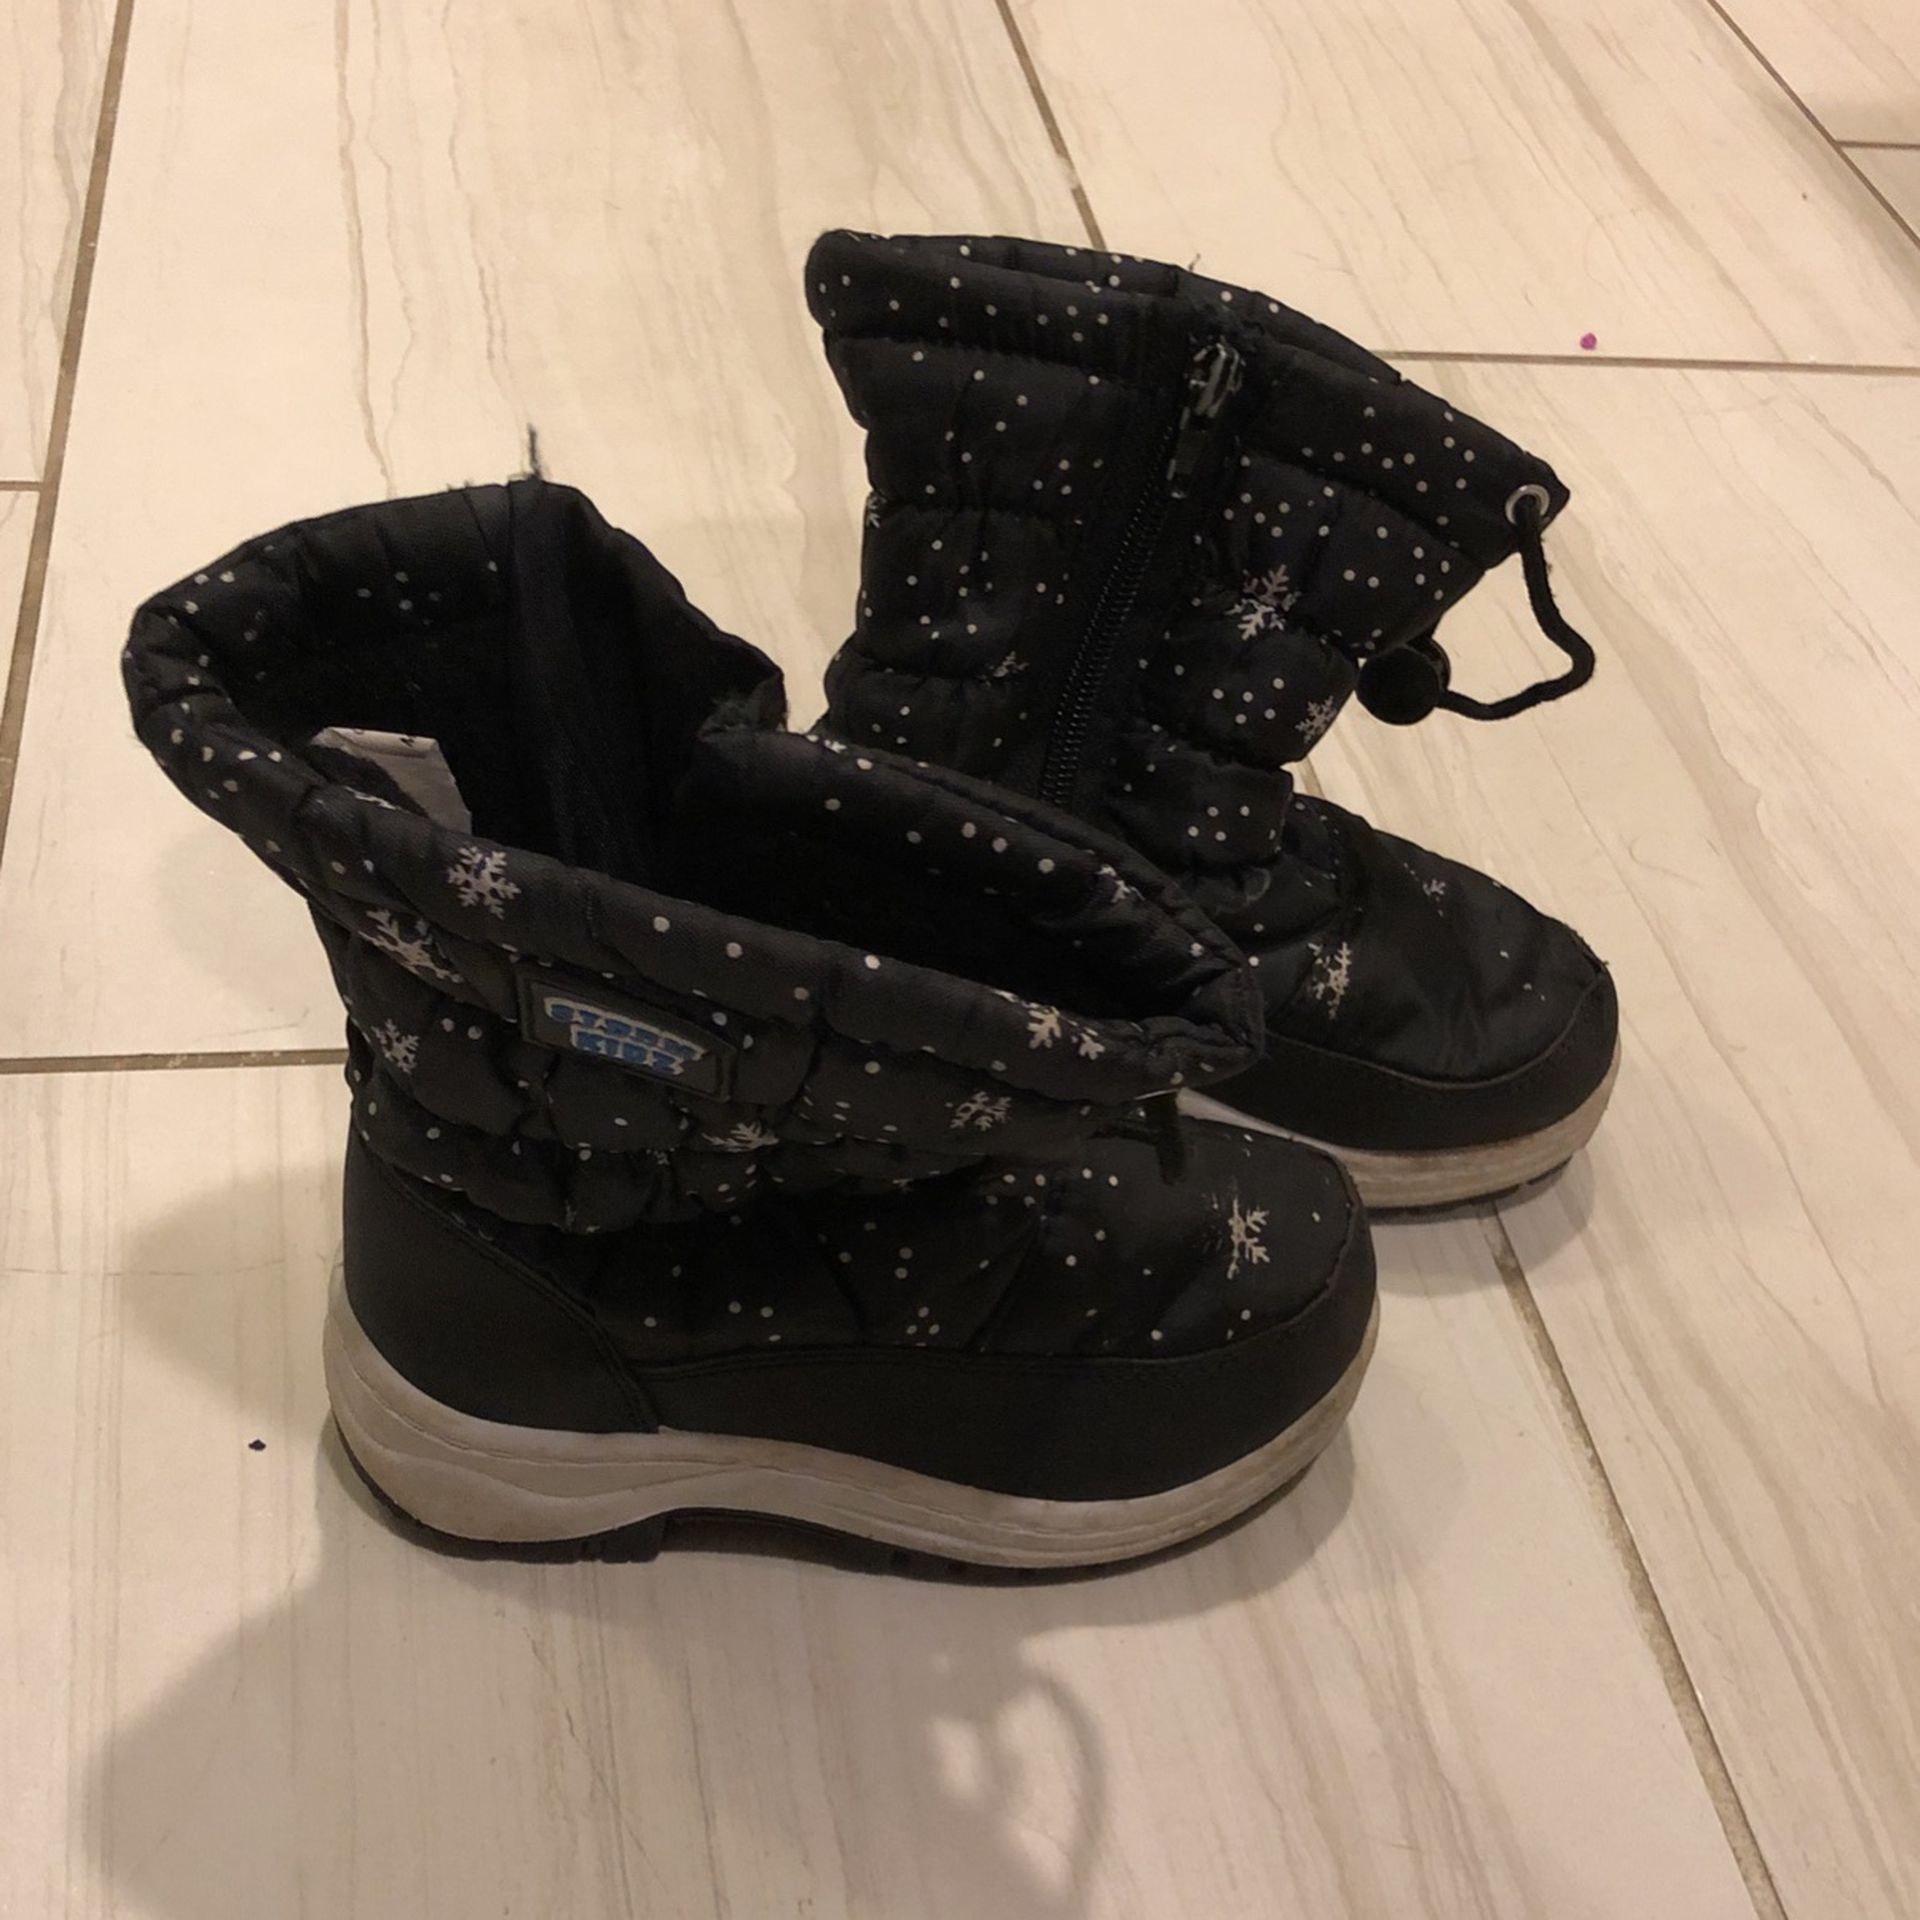 Child Size 8 Snow Boots